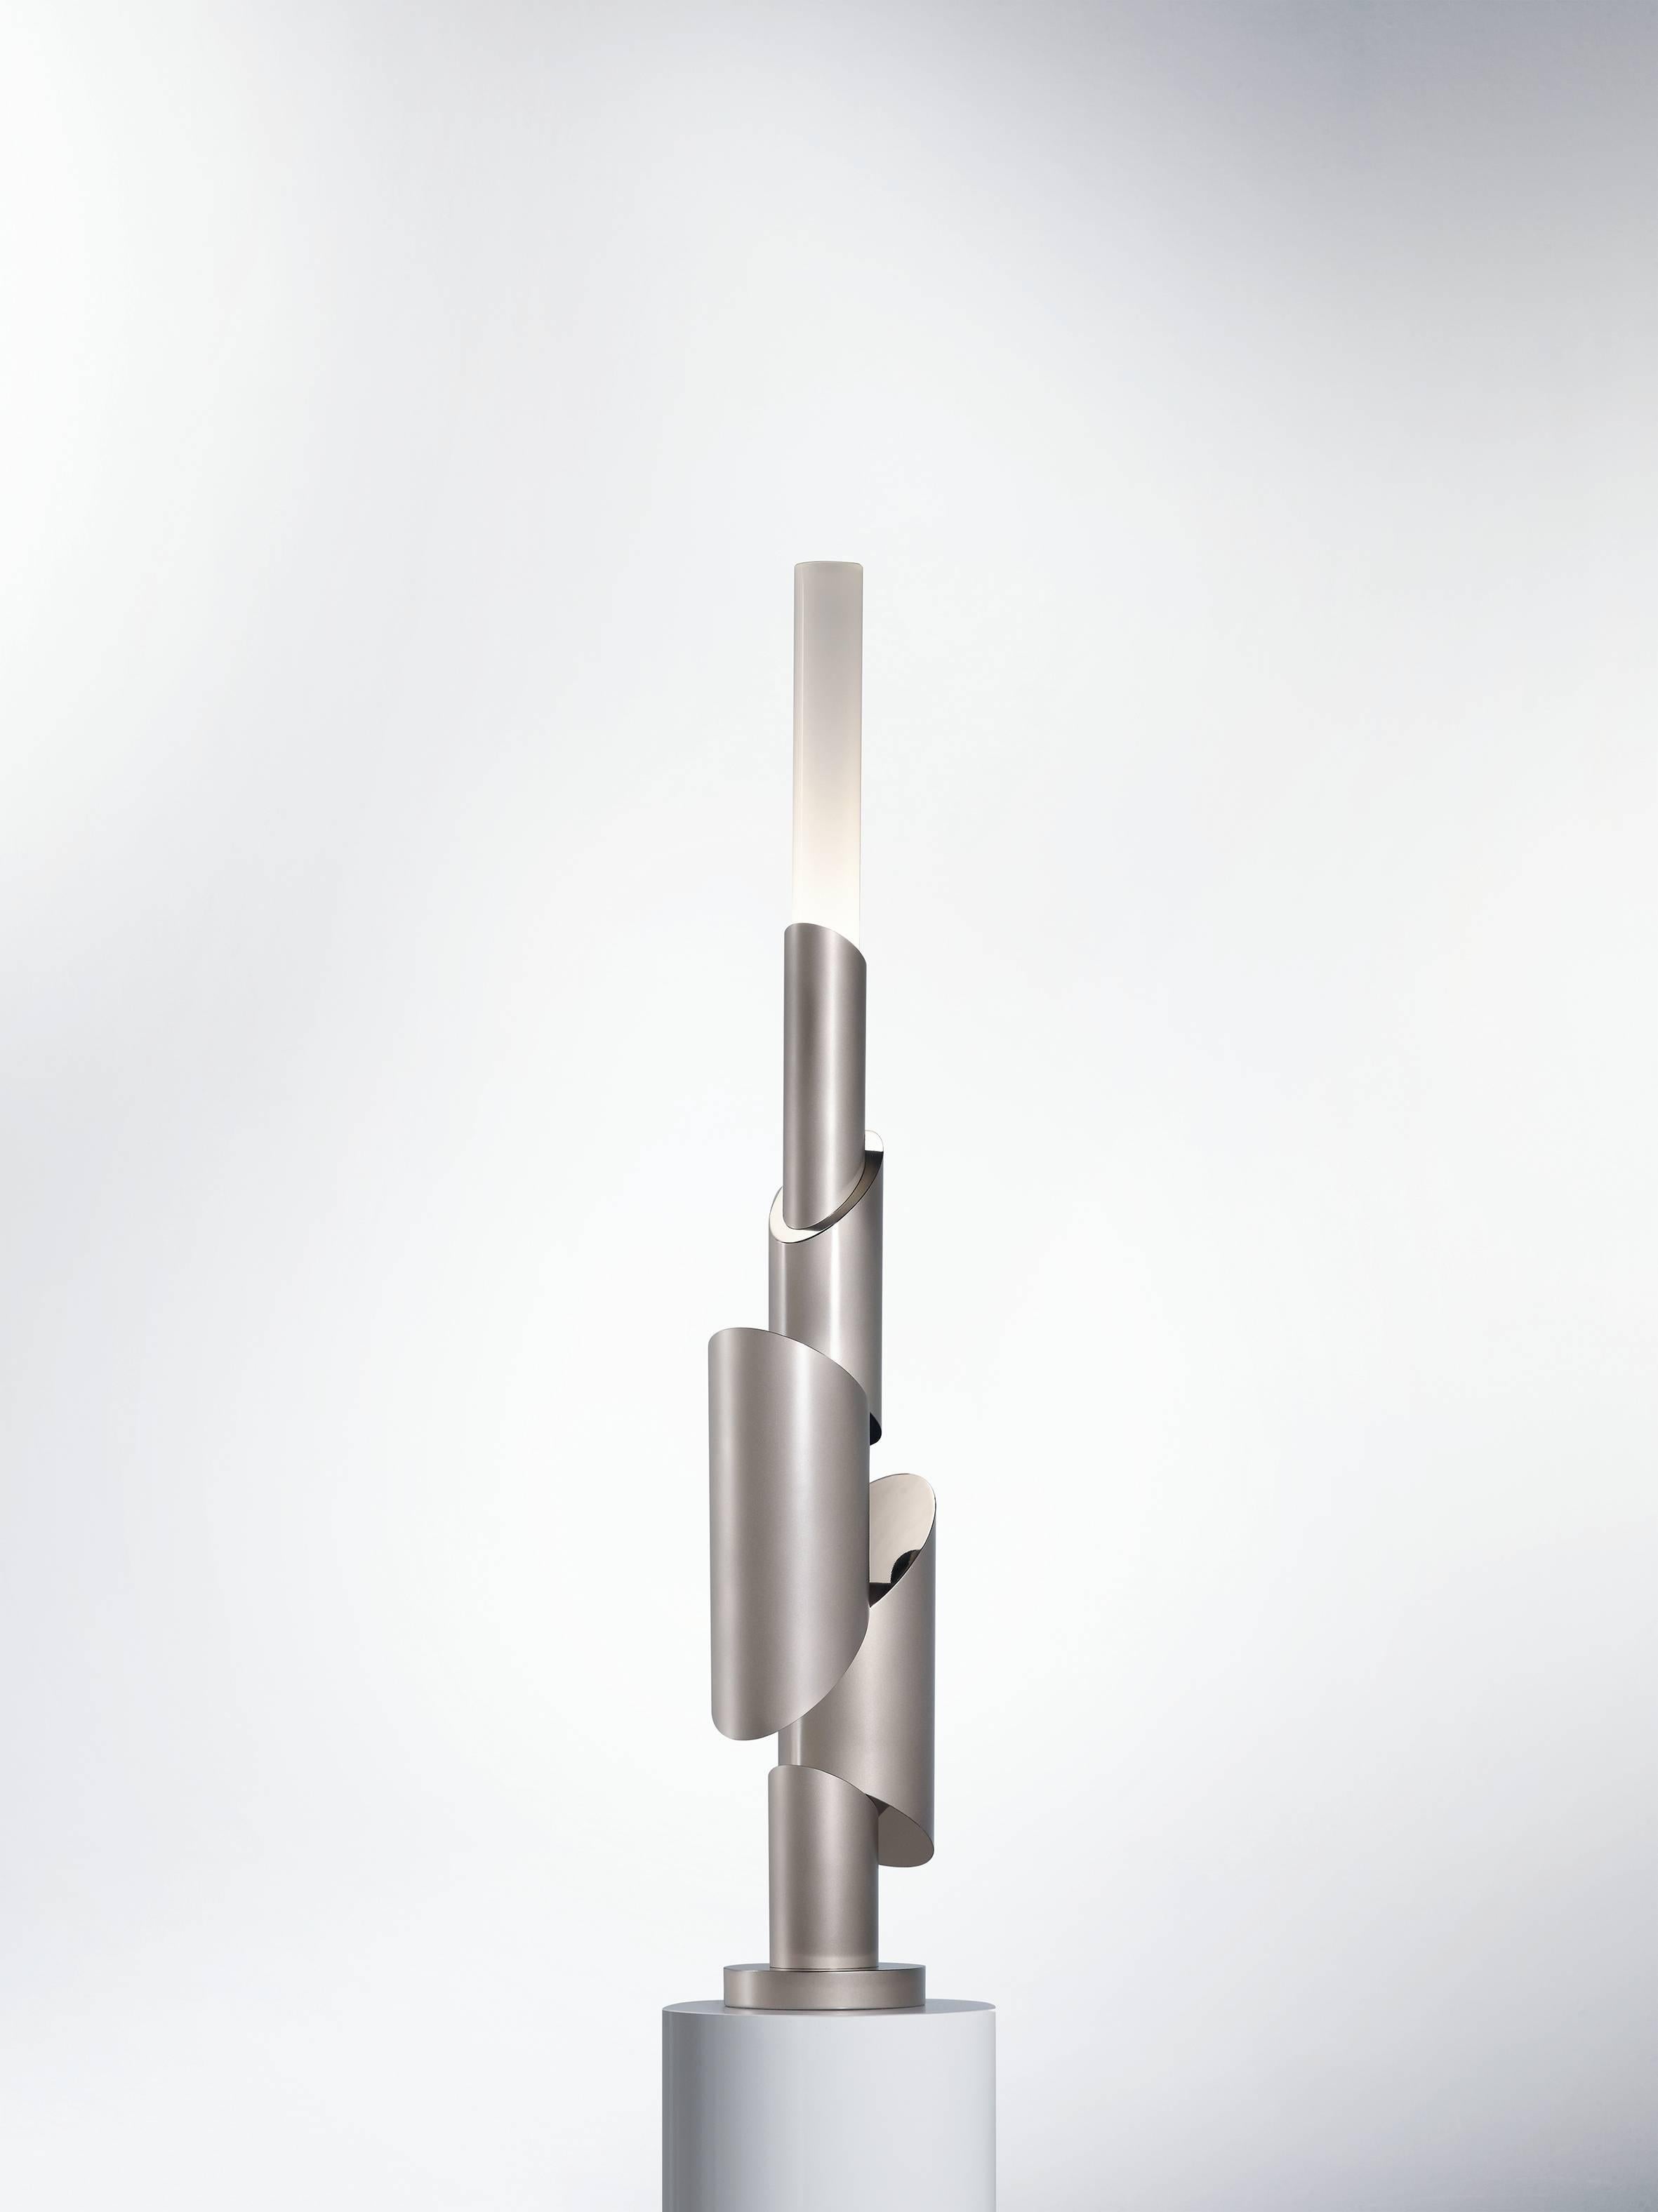 Totem II, table lamp, signed William Guillon 
Limited Edition of 12
Signed and numbered
Solid aluminium, smoke nickel / copper finish.
Sand-blasted / Polished.
Dimensions: 85 x 16 x 13 cm 
Handsculpted in France




Collapse